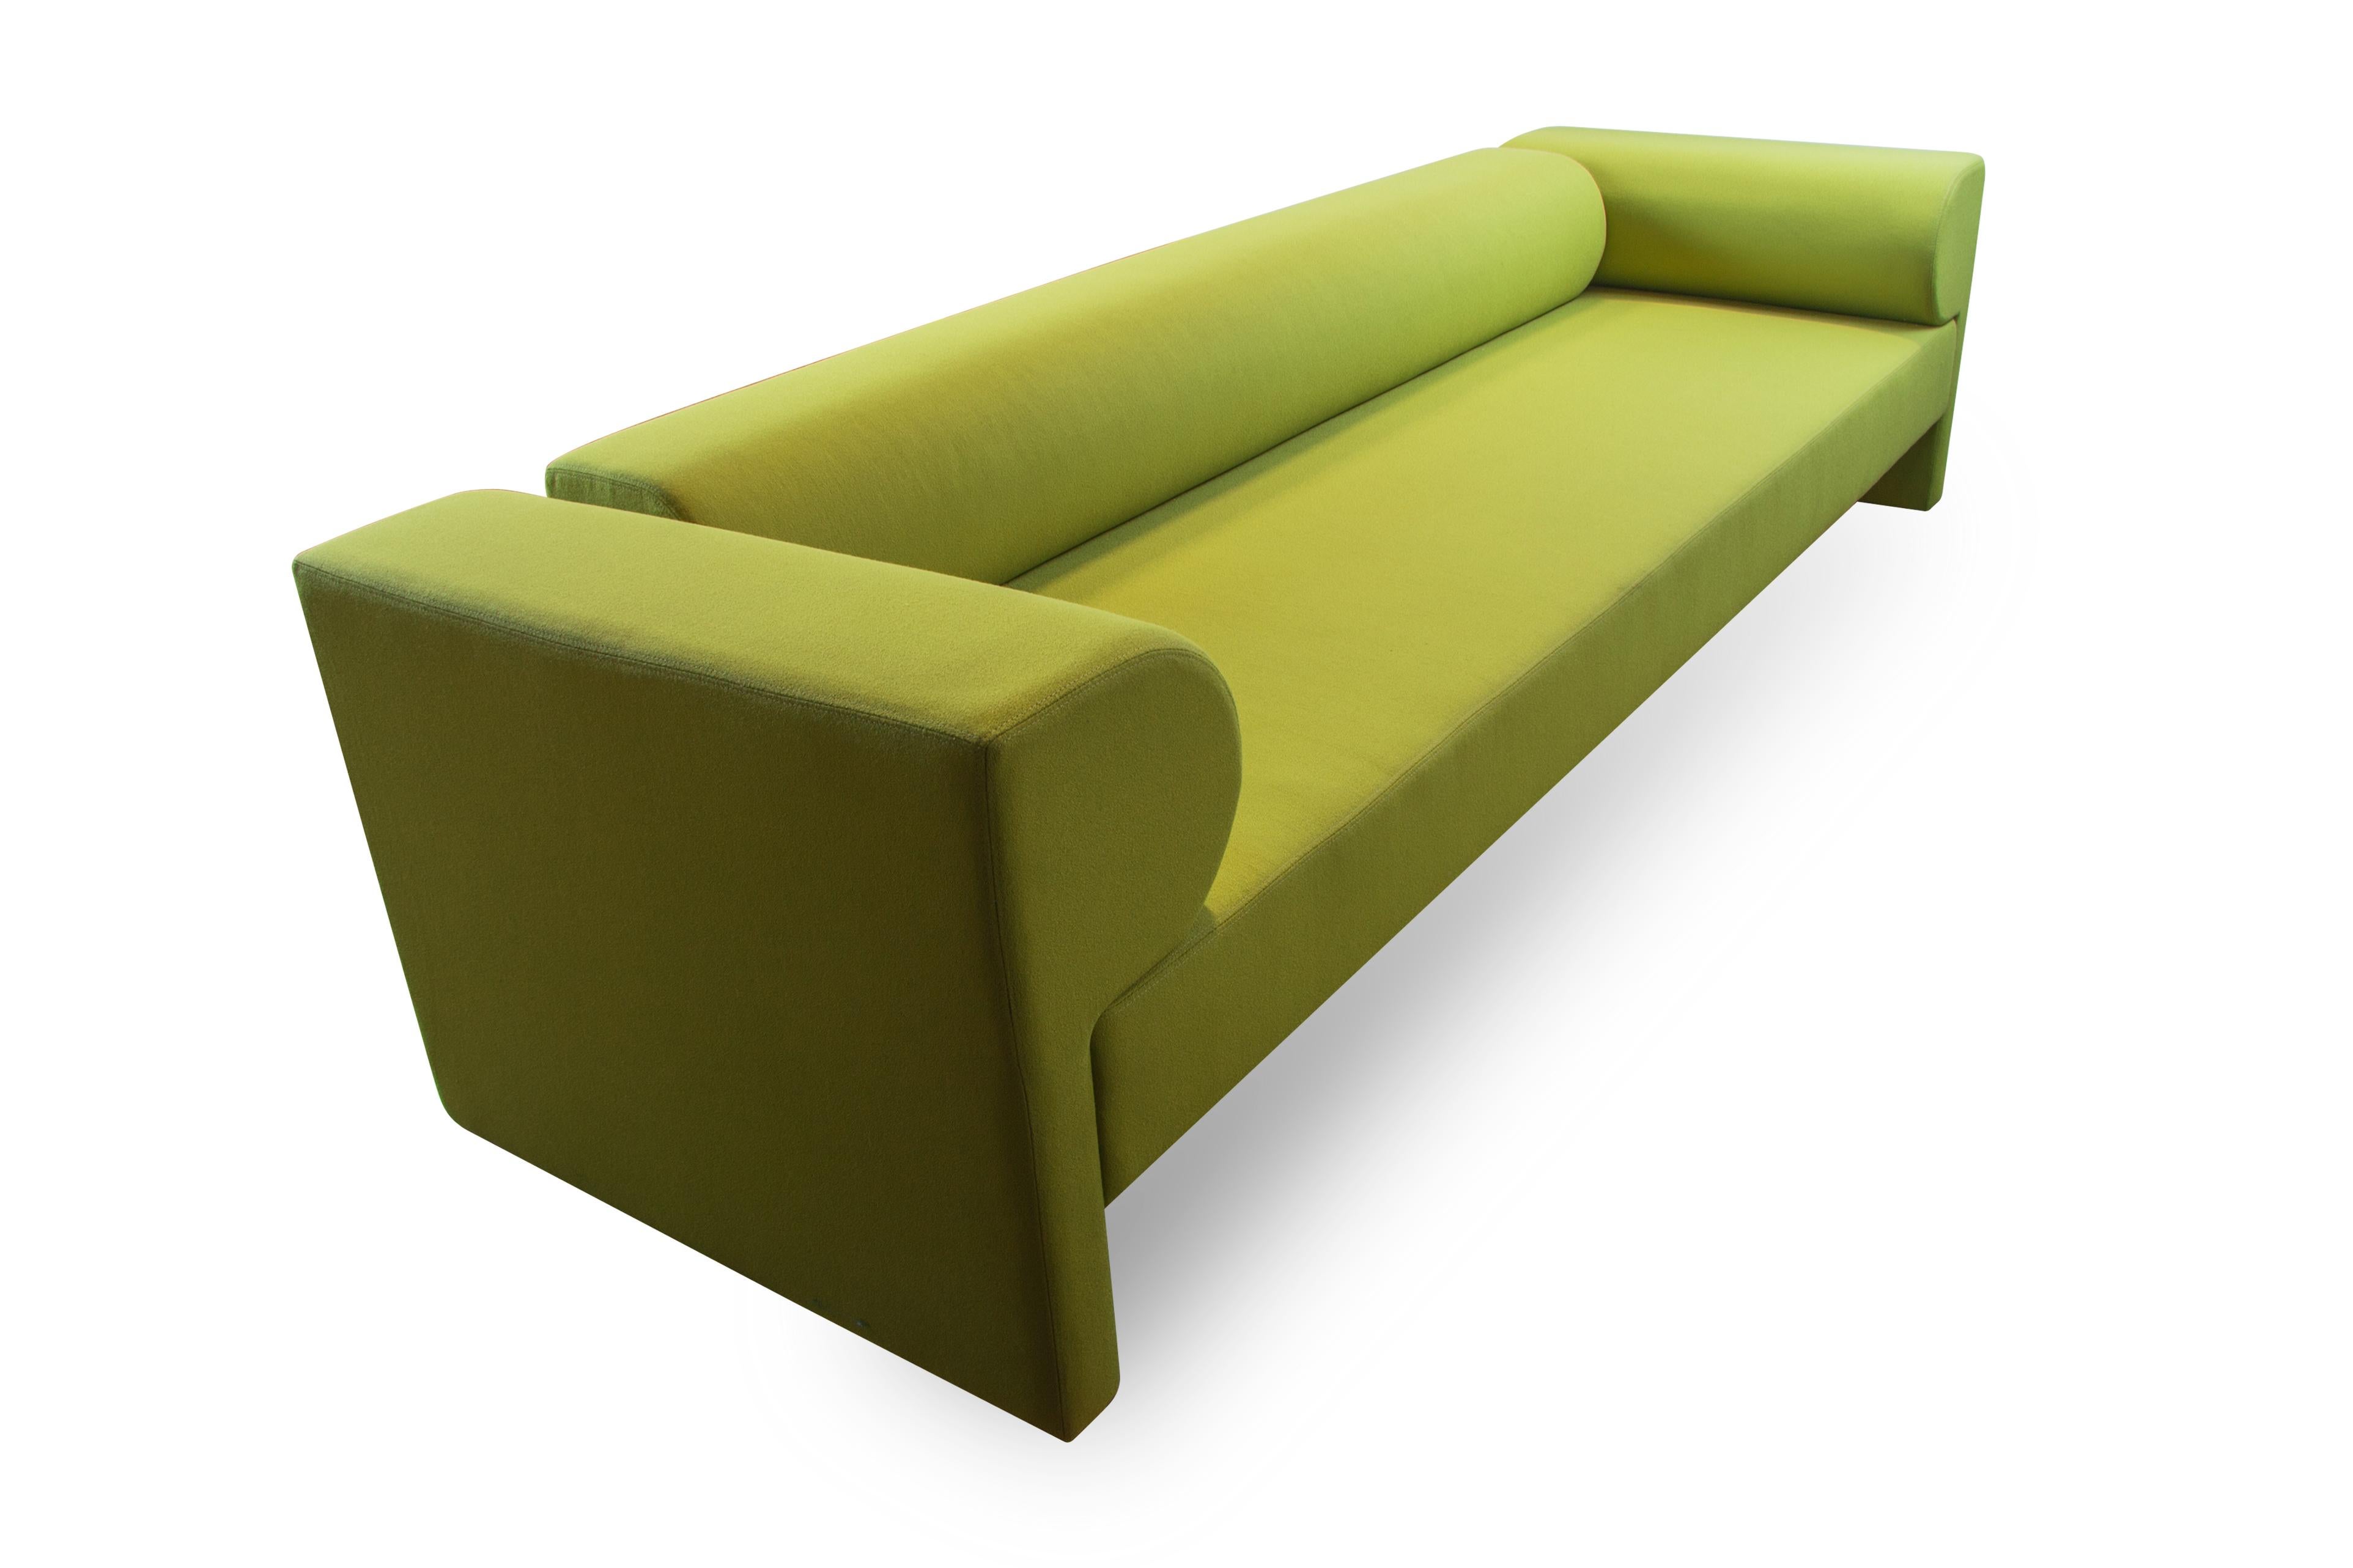 Green say sofa by Gentner Design
Dimensions: D 271 x W 86 x H 63.5 cm
Materials: fabric
COM available.

Strong formal lines and geometric shapes seem like puzzle pieces that come together defining the Say Sofa. COM options and other